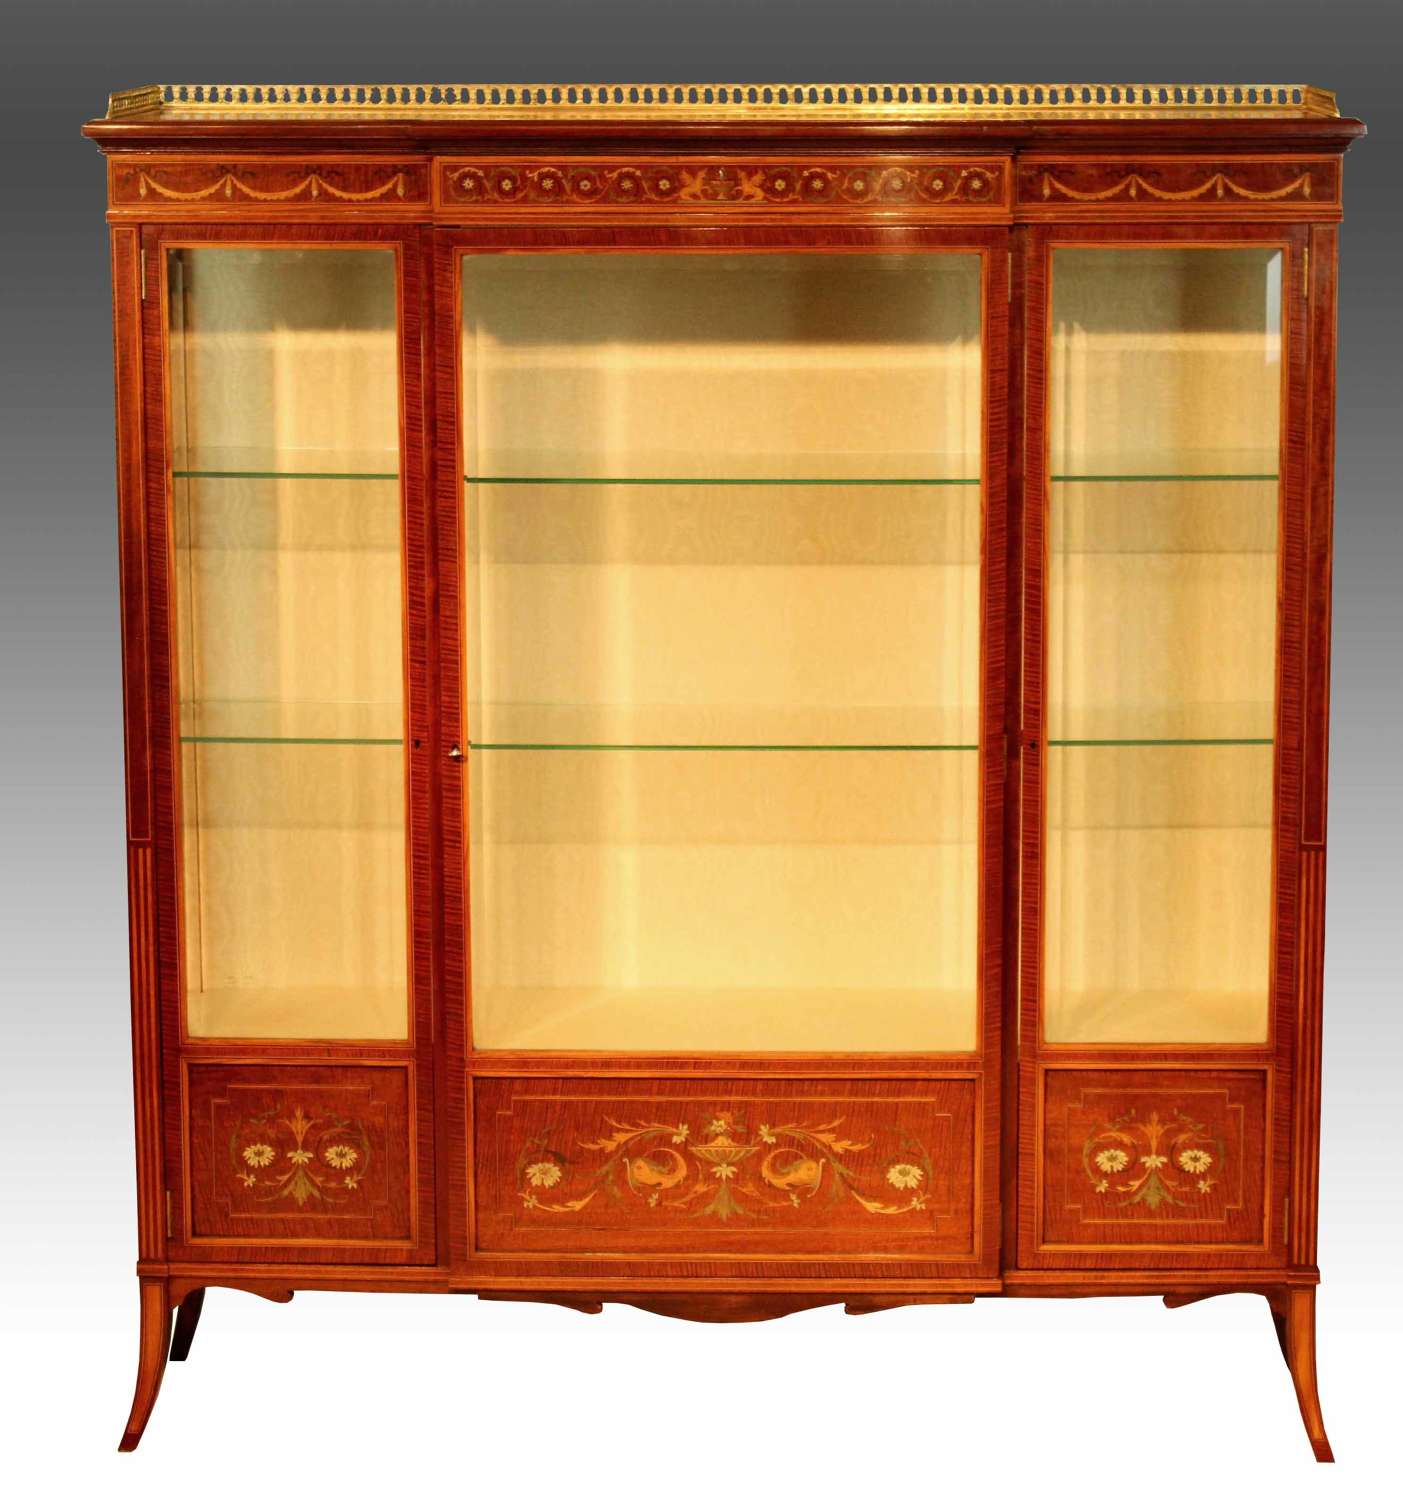 A Late Victorian Mahogany Marquetry Fiddleback Display Cabinet.